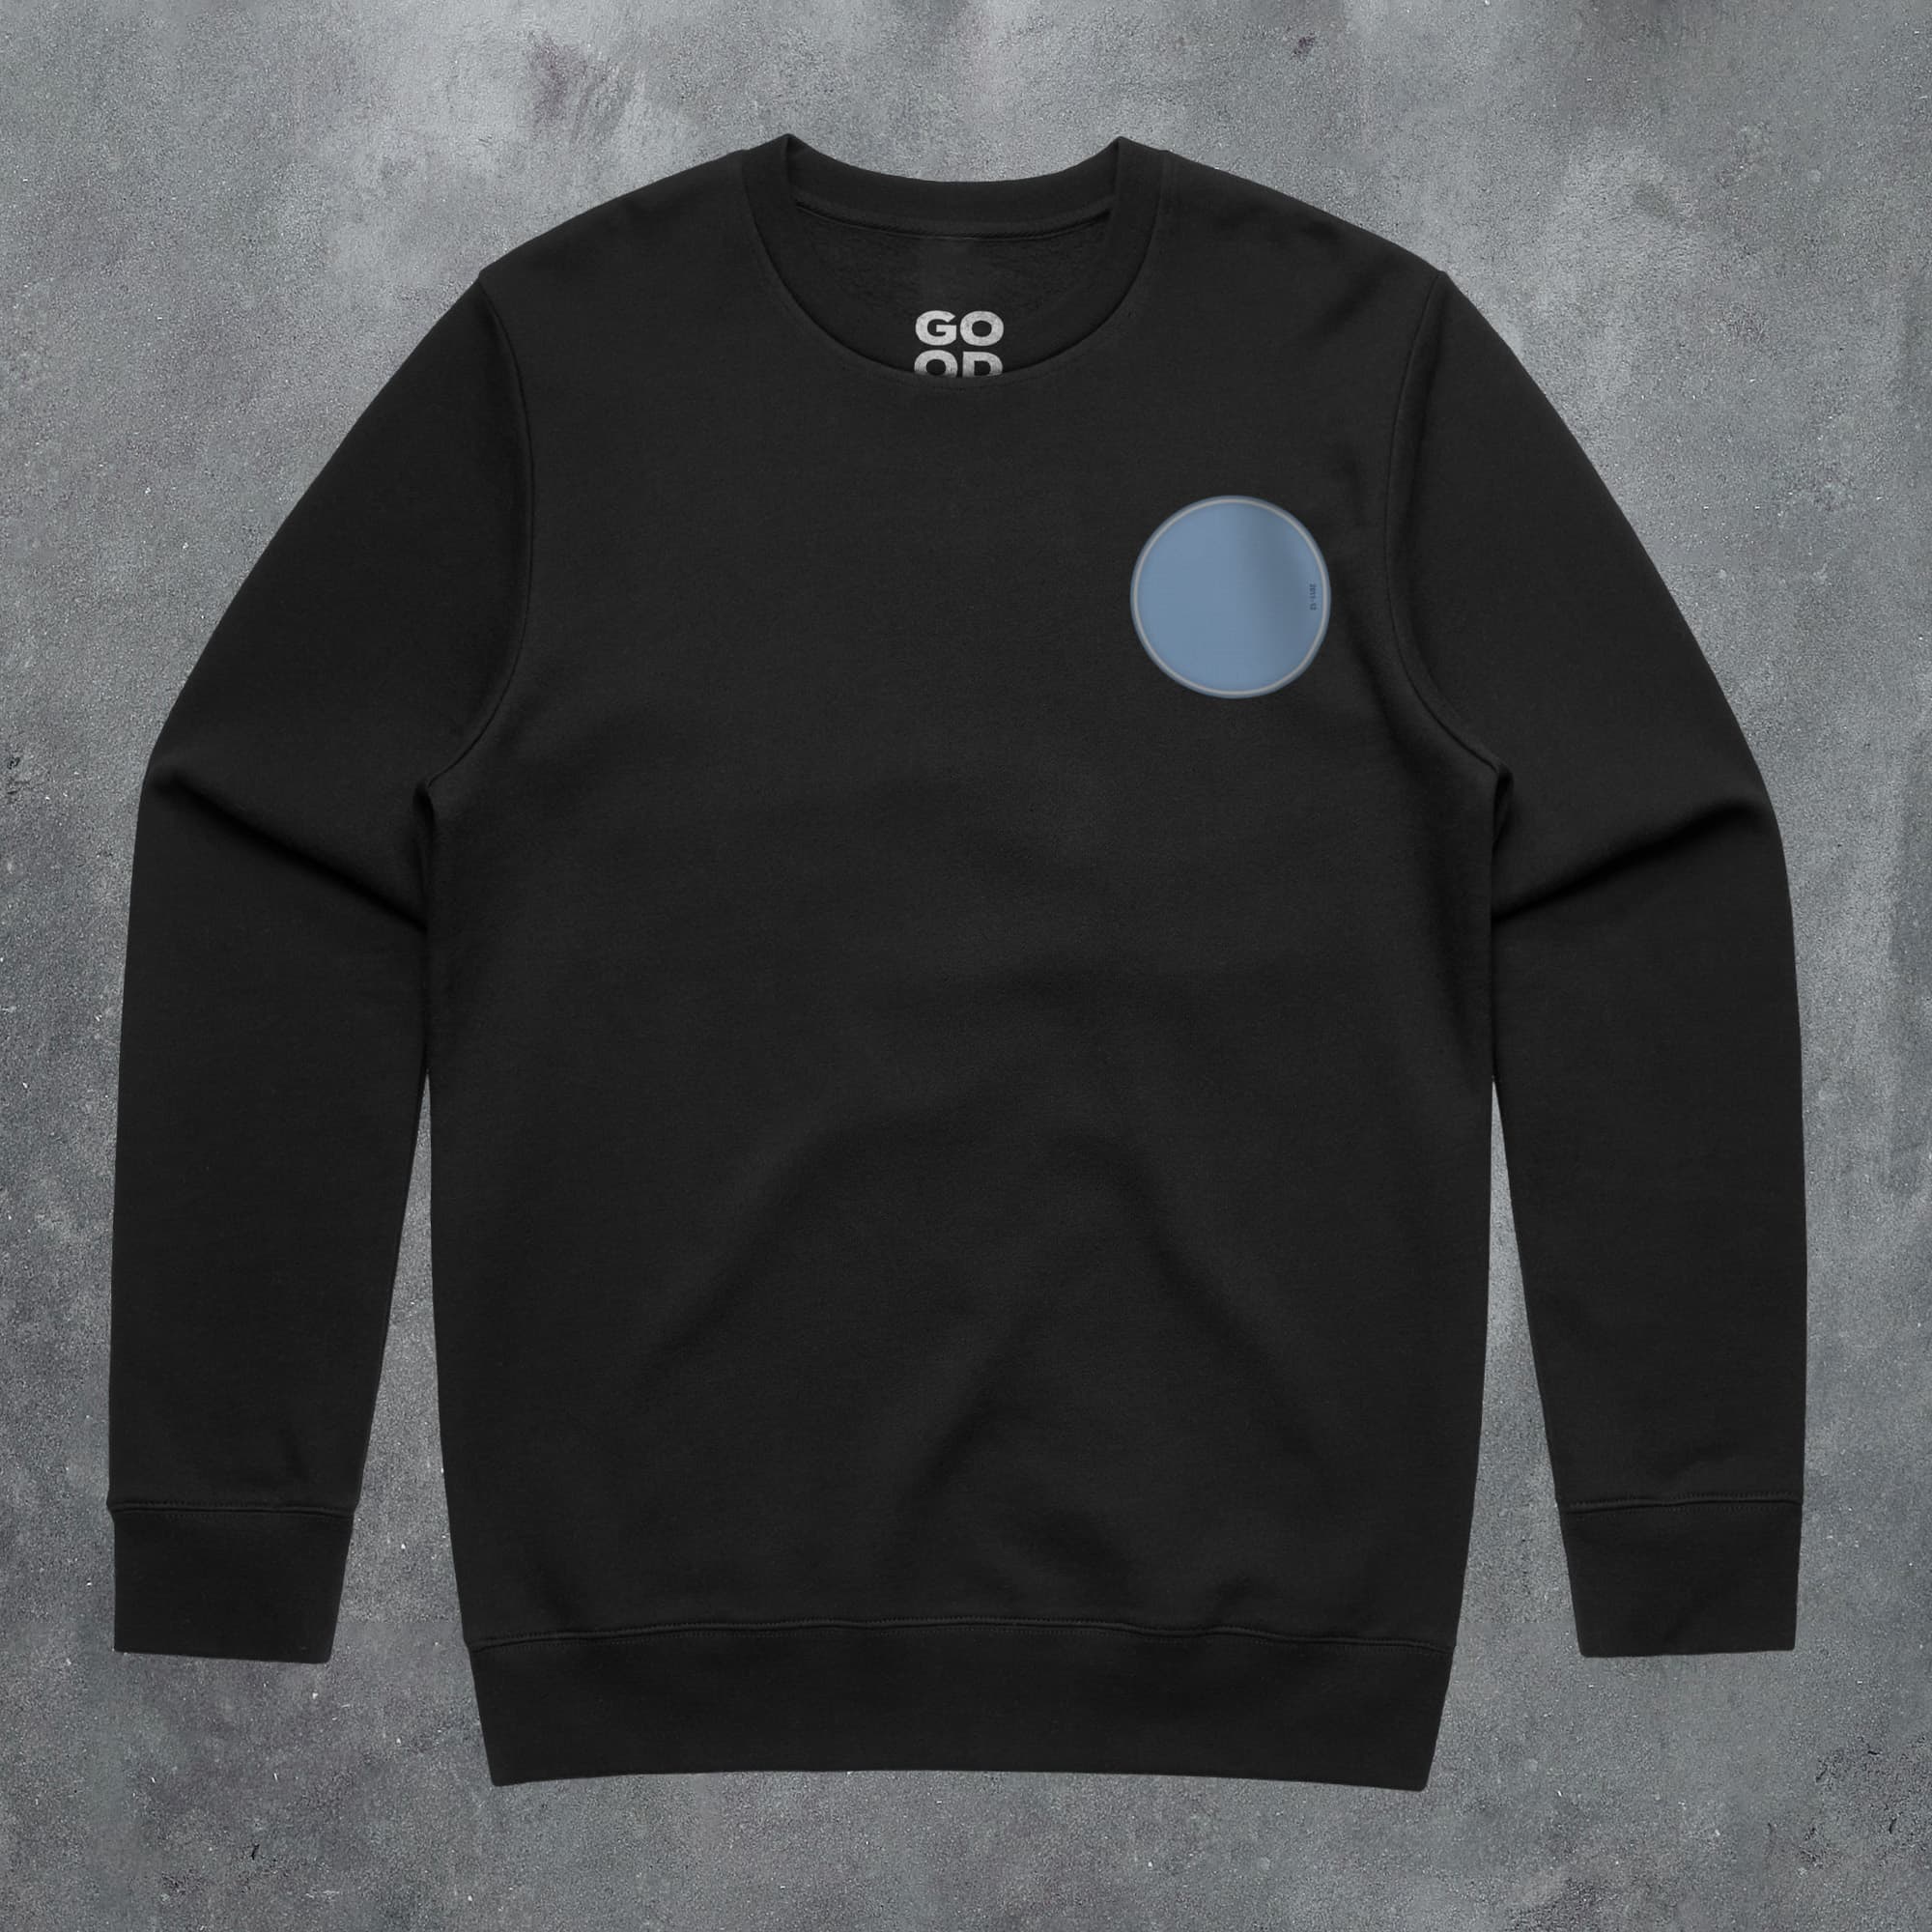 a black sweatshirt with a blue circle on it